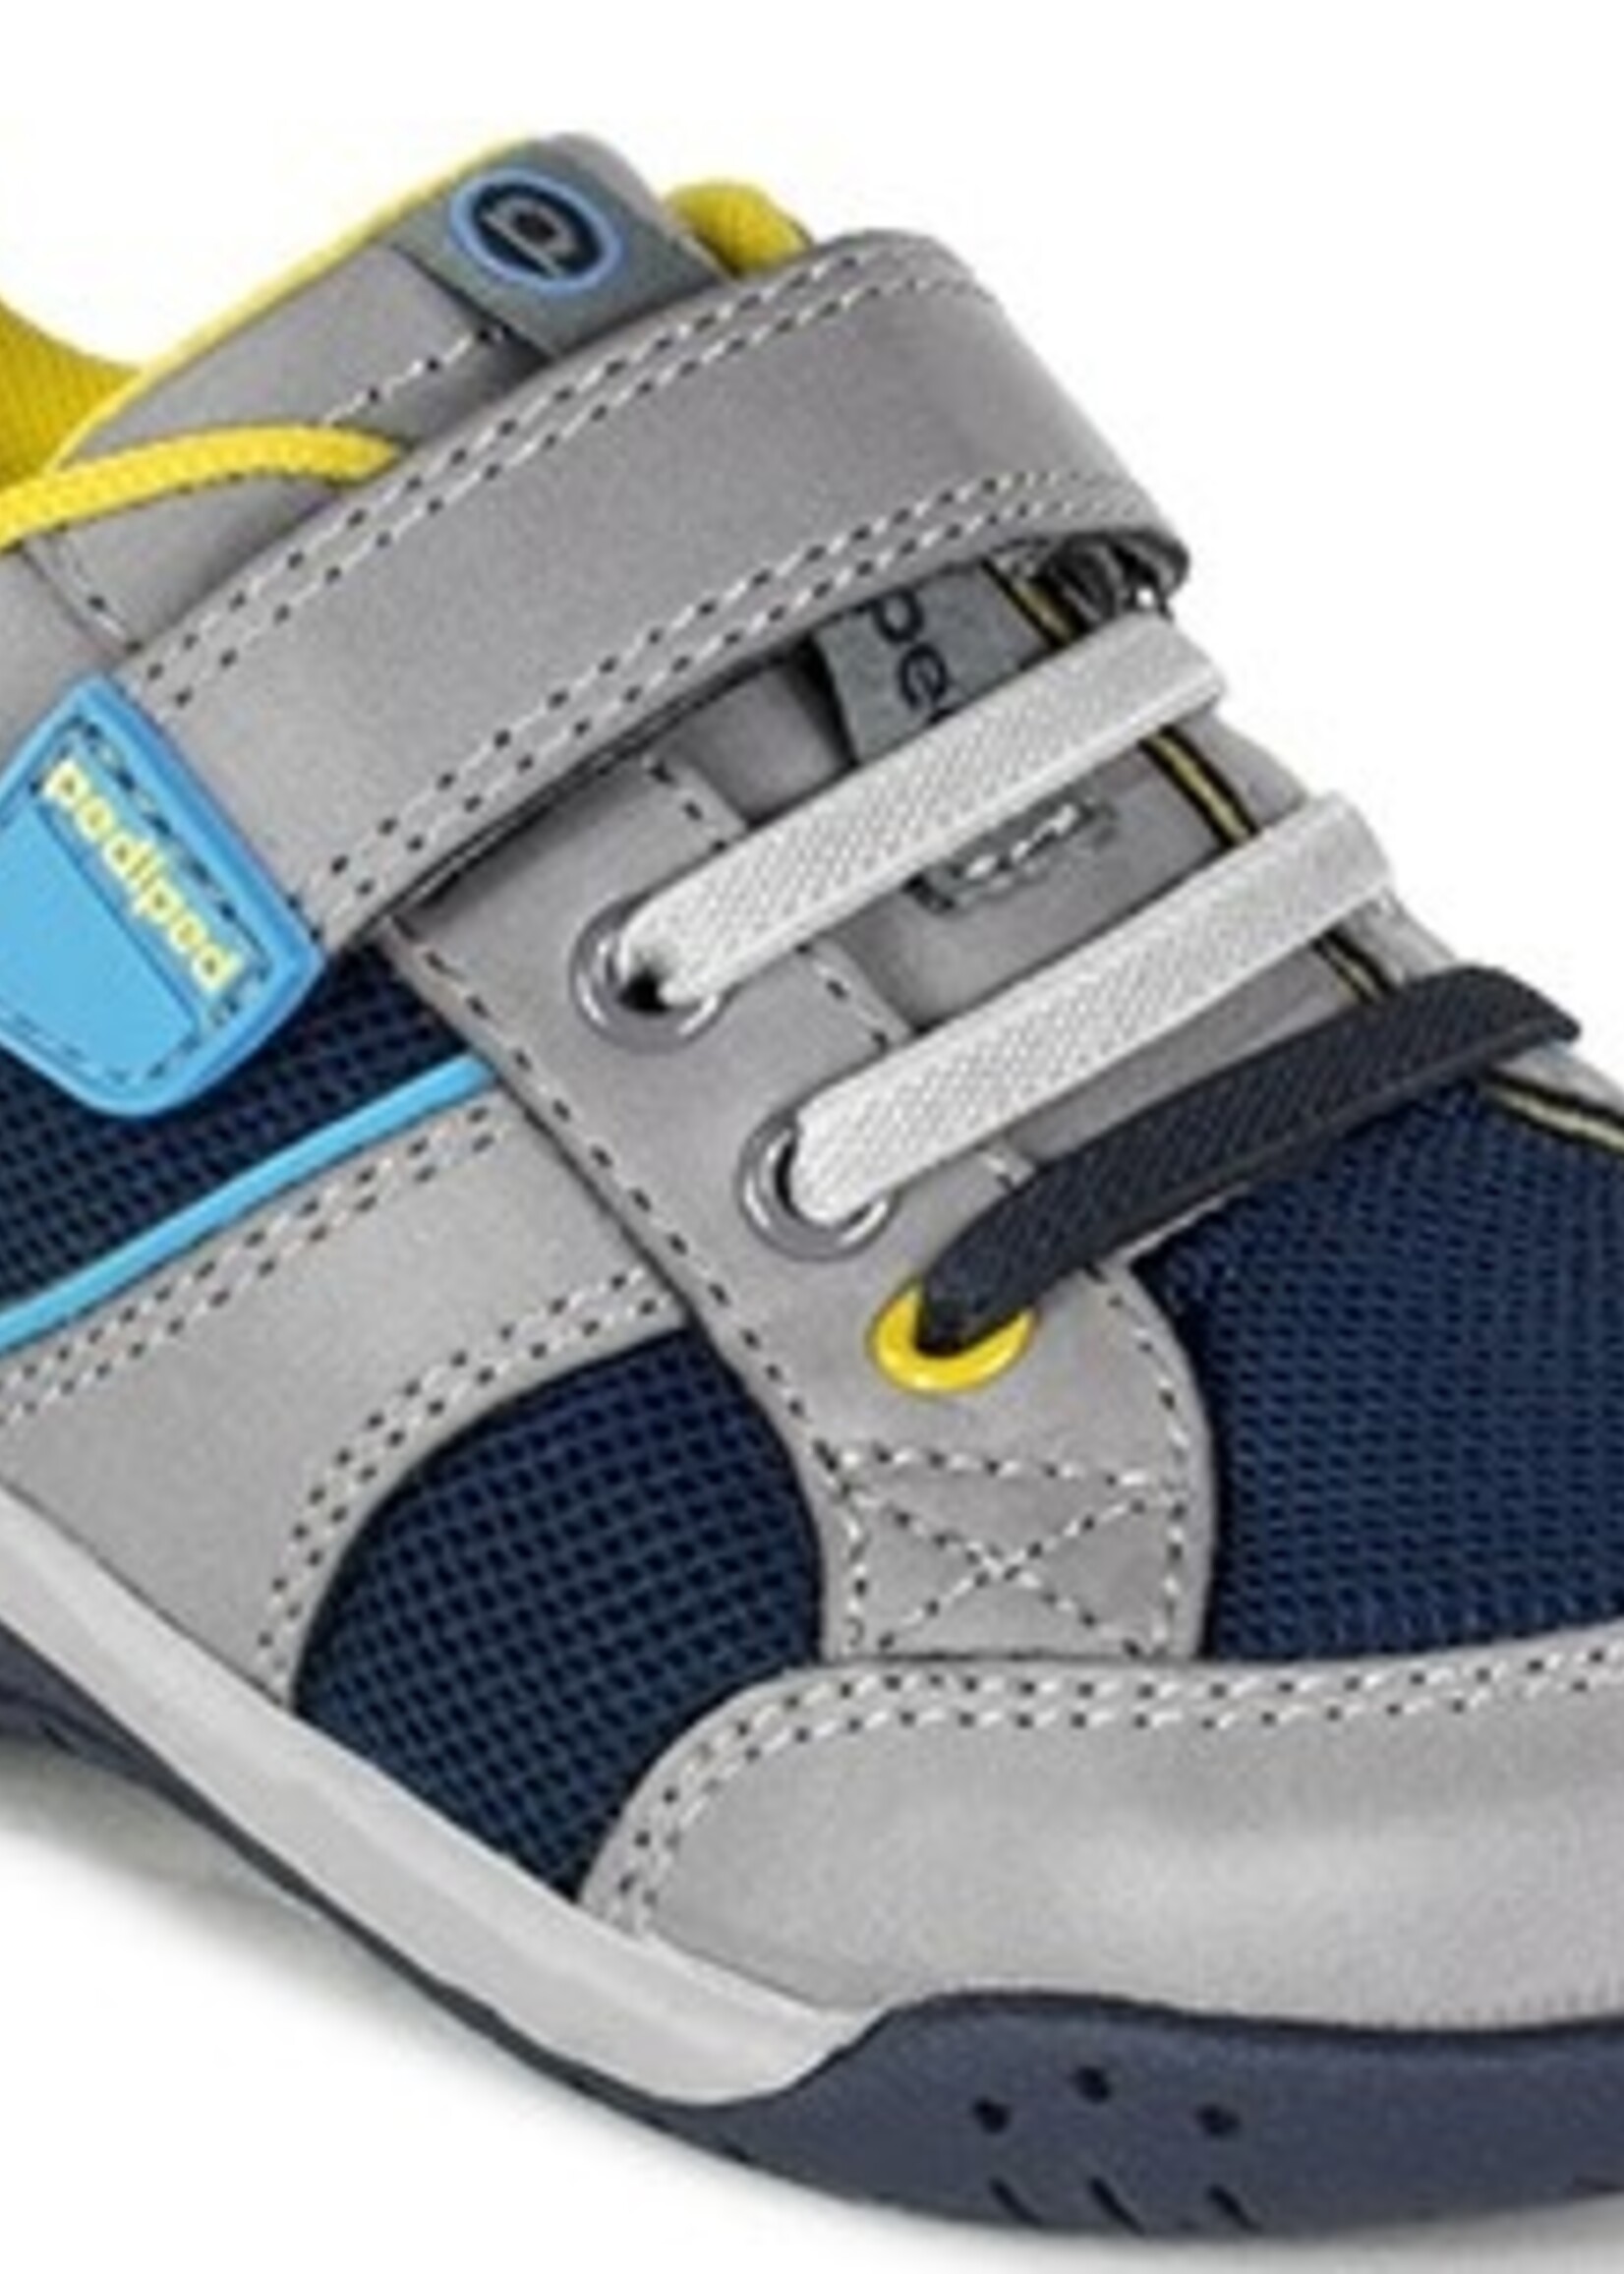 Pediped Pediped Justice Grey/Navy 1.5-2